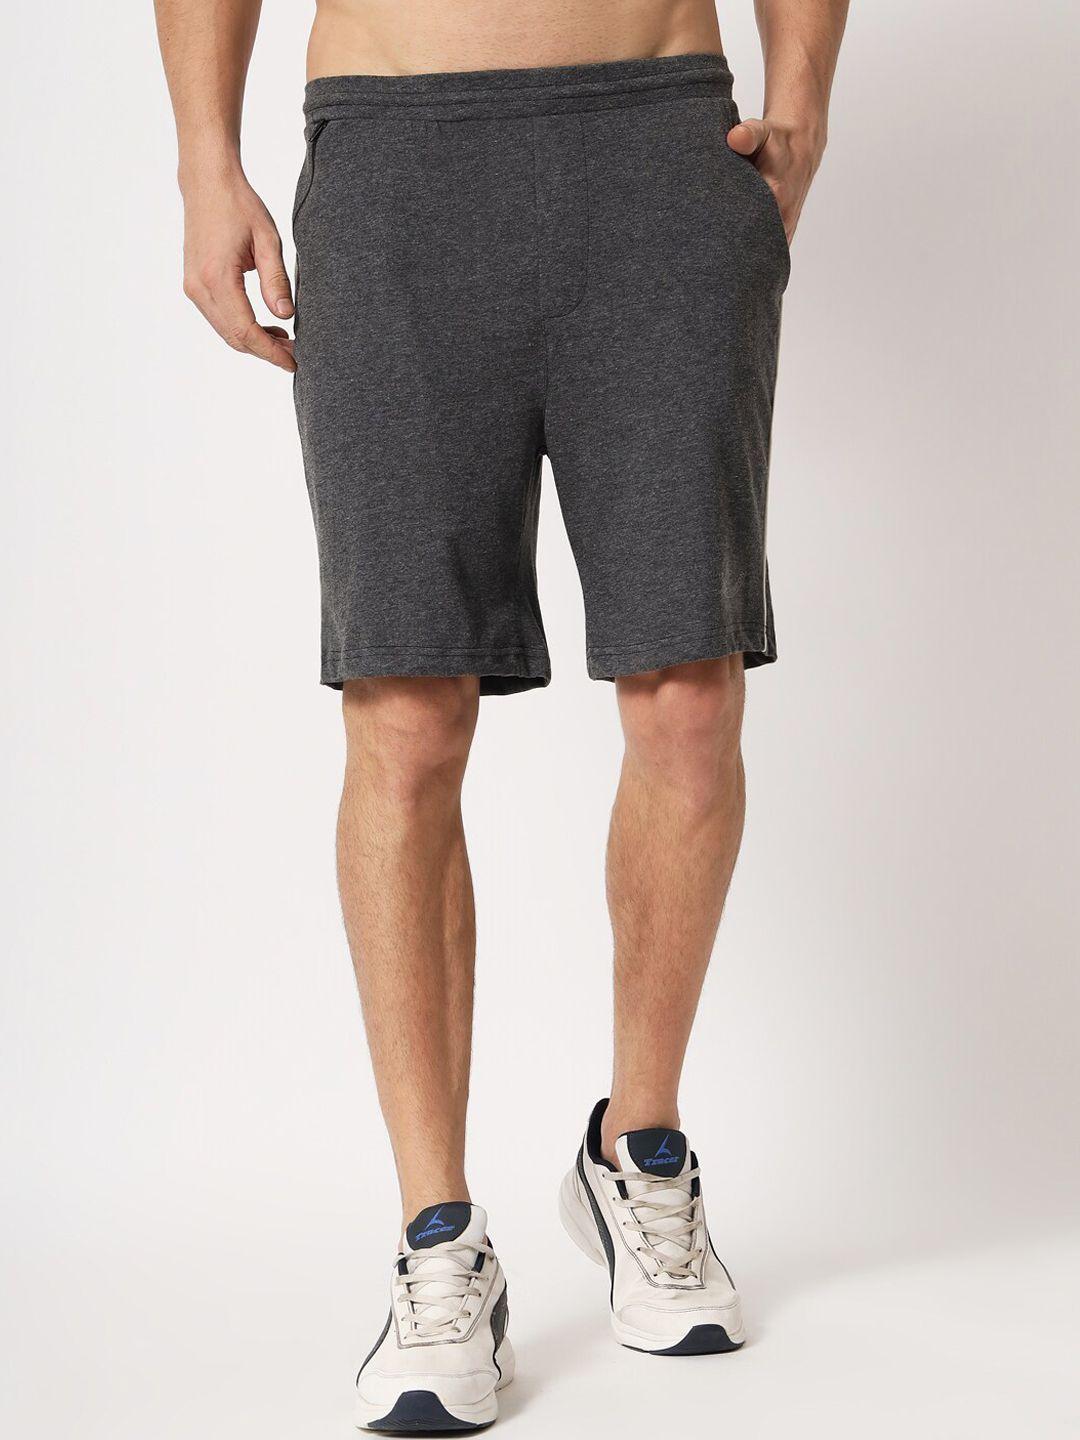 aazing-london-men-charcoal-solid-cotton-sports-shorts